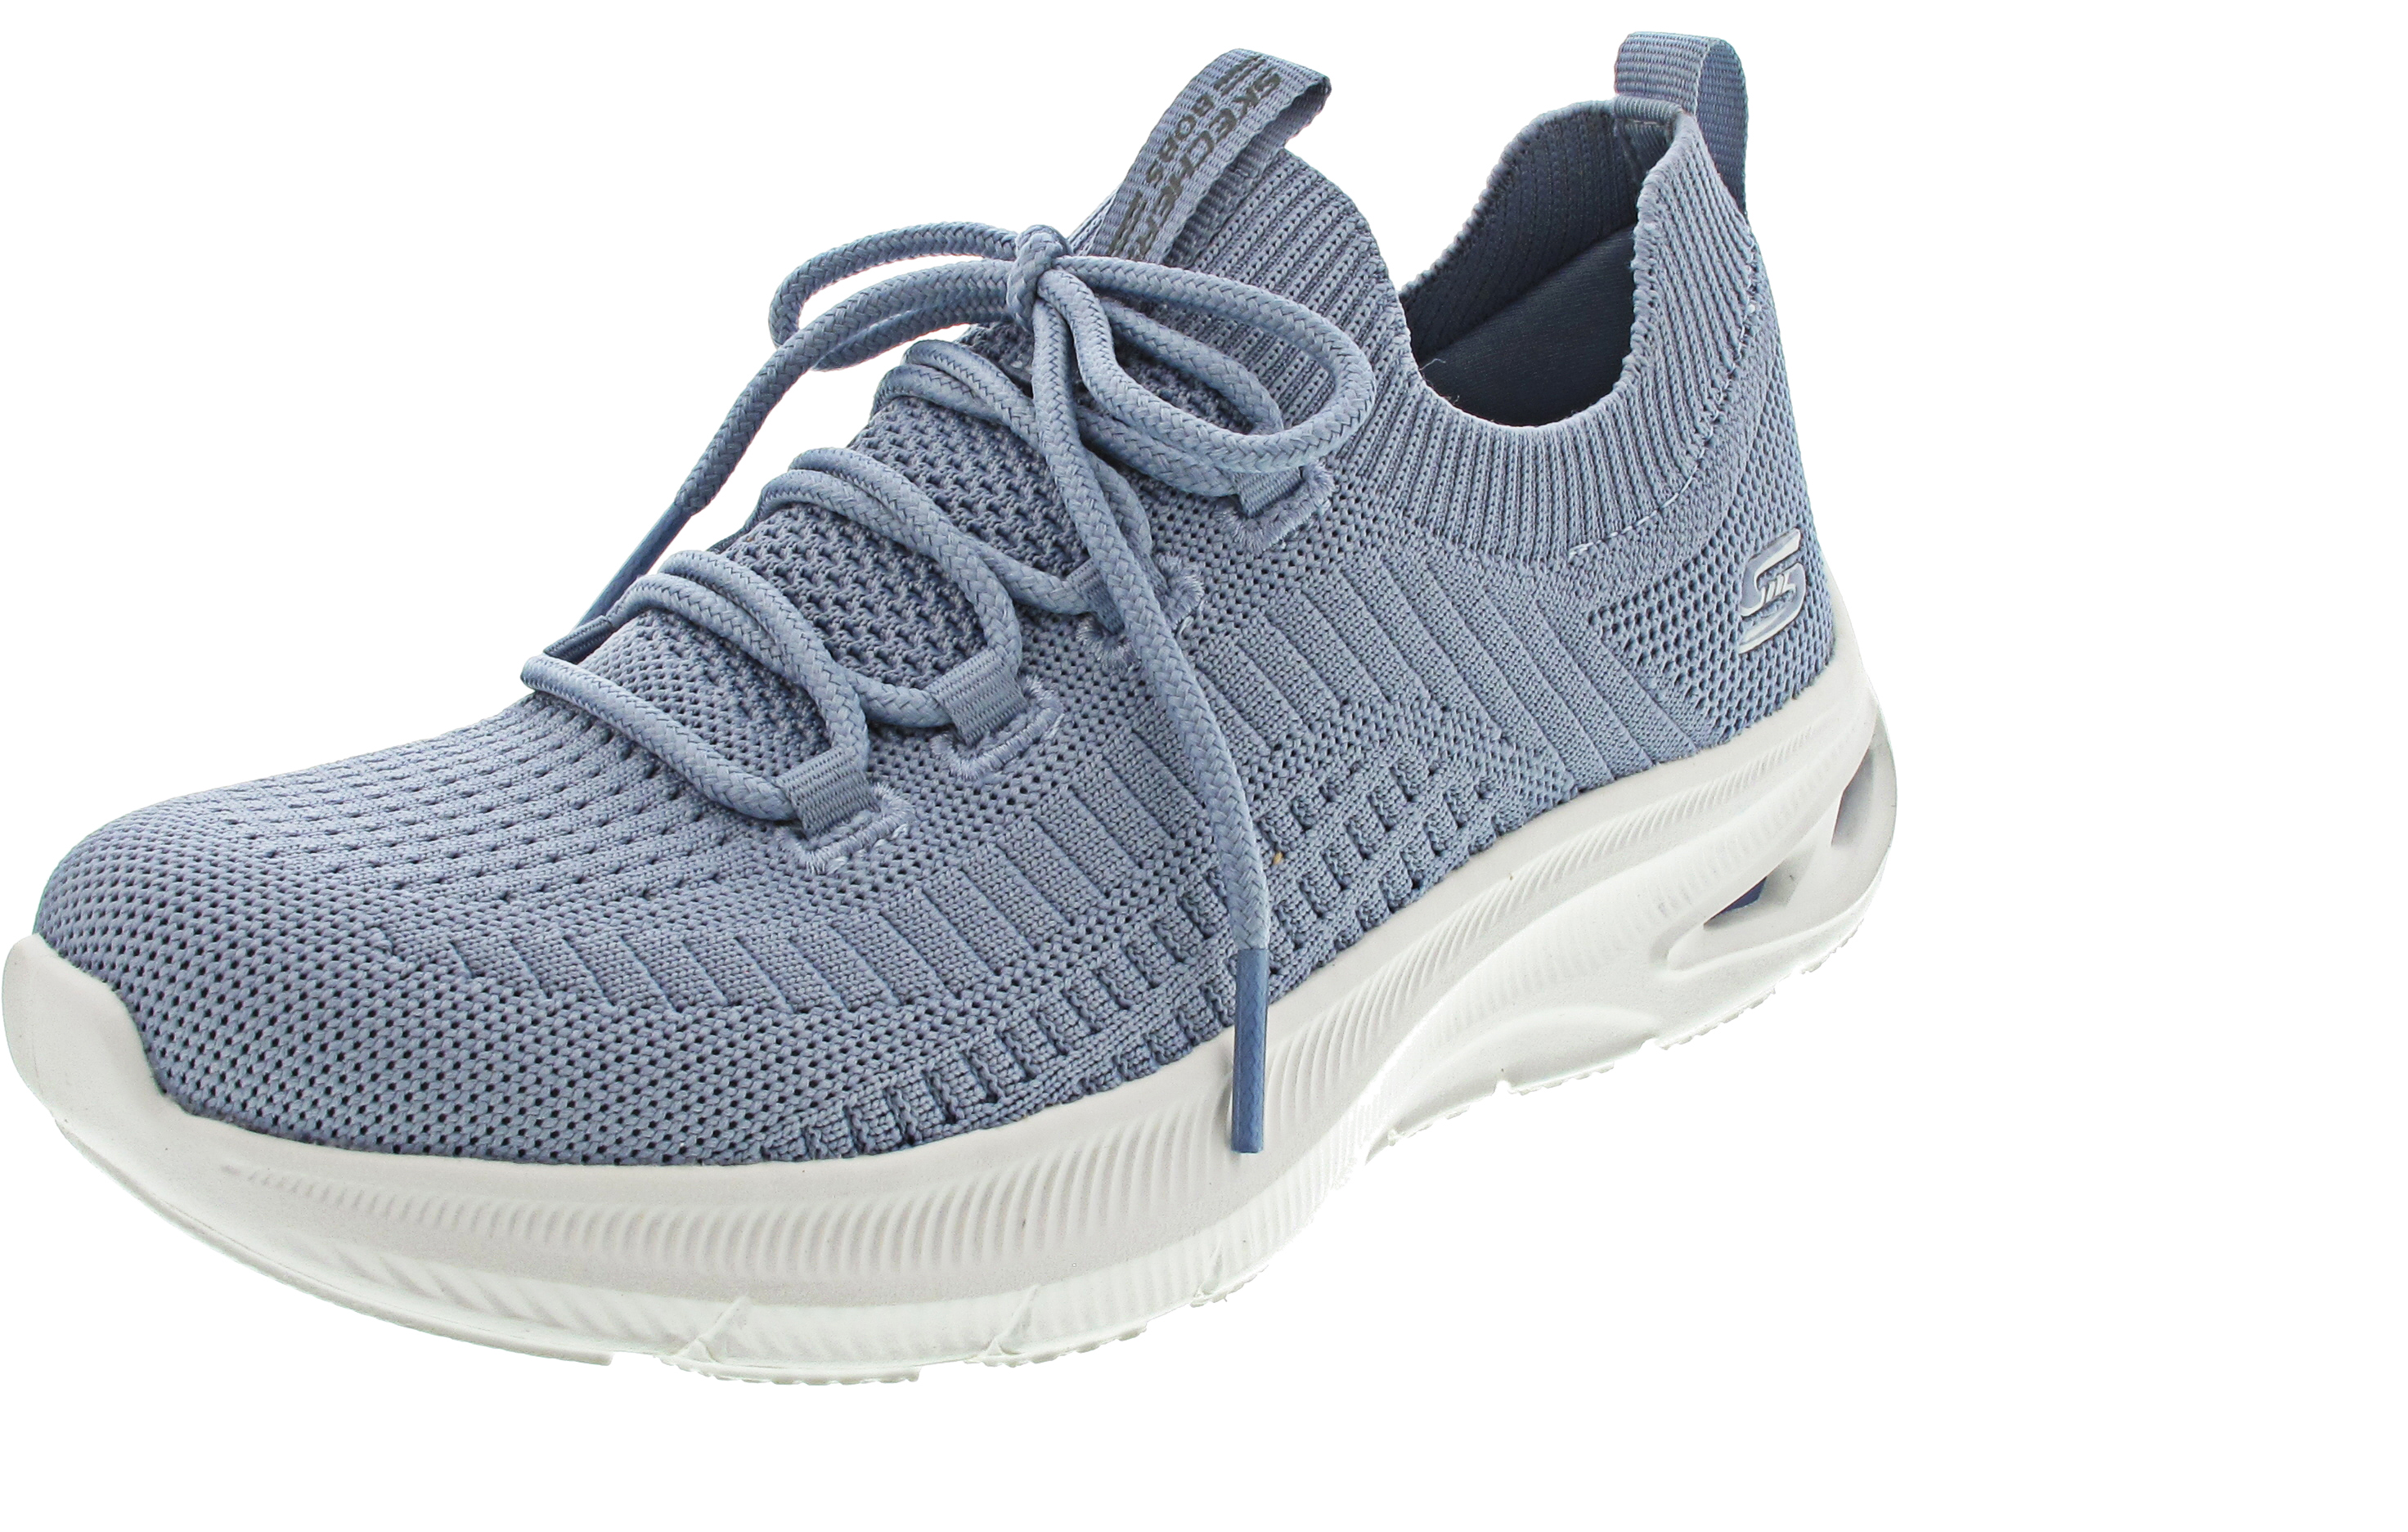 Skechers Bobs Unity-Absolute Gusto